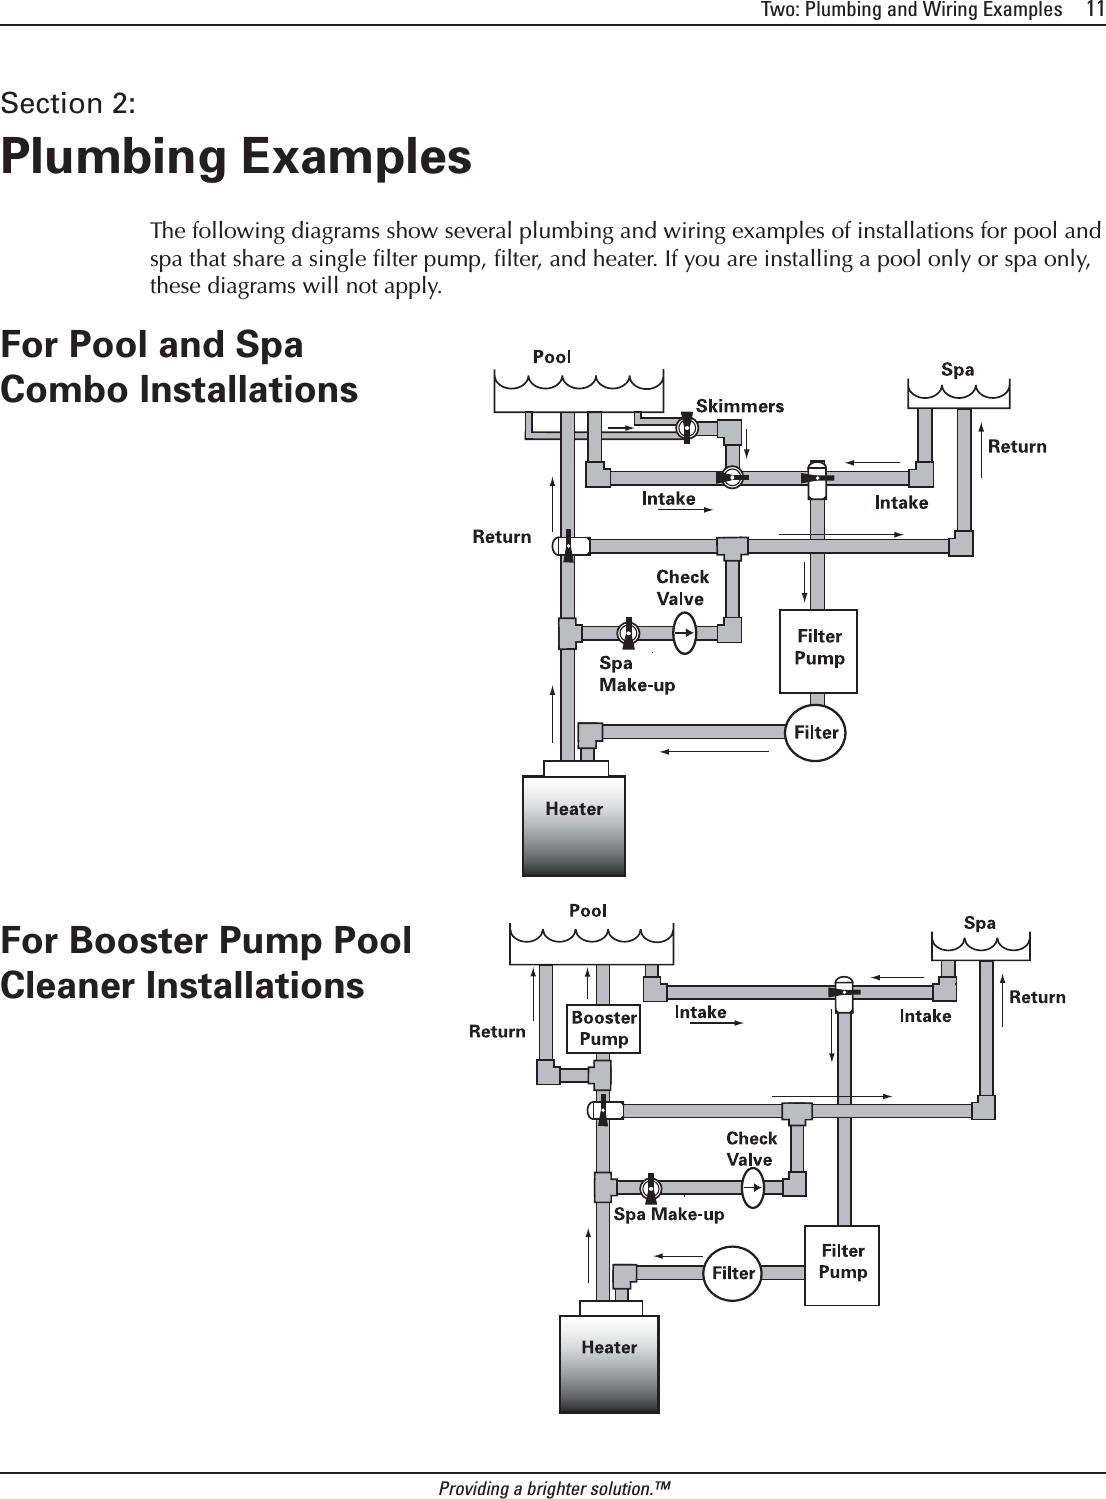 Two: Plumbing and Wiring Examples     11Providing a brighter solution.™Section 2:  Plumbing ExamplesThe following diagrams show several plumbing and wiring examples of installations for pool and spa that share a single ﬁlter pump, ﬁlter, and heater. If you are installing a pool only or spa only, these diagrams will not apply.For Pool and Spa Combo Installations               For Booster Pump Pool Cleaner Installations